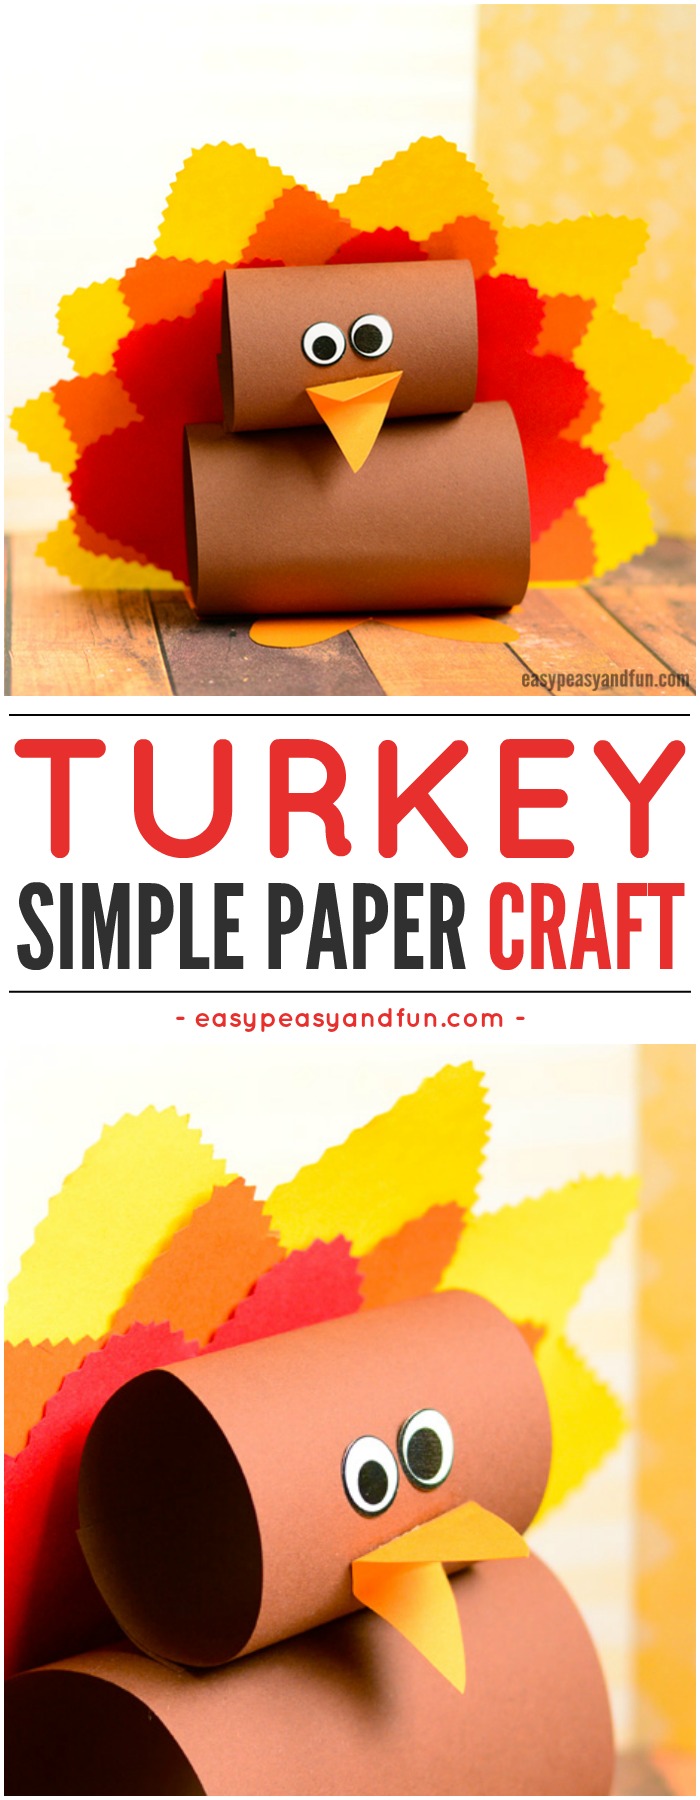 Simple Paper Turkey Craft for Kids. Fun paper Thanksgiving craft idea to keep them busy.